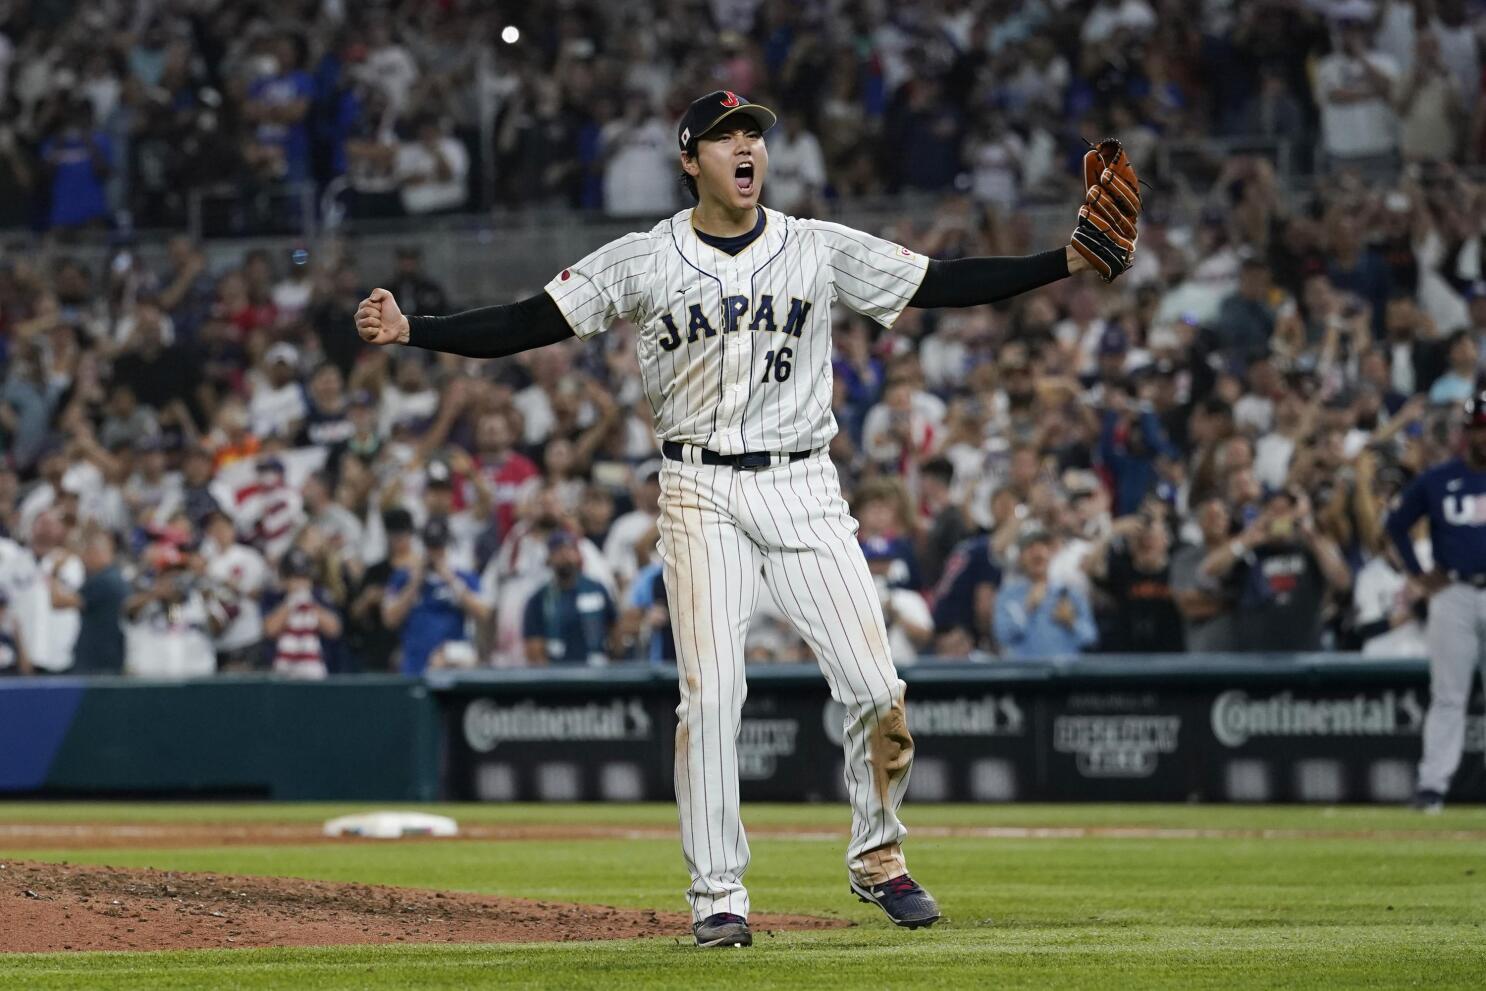 BASEBALL/ Cap Ohtani flung in air after WBC victory headed for Cooperstown